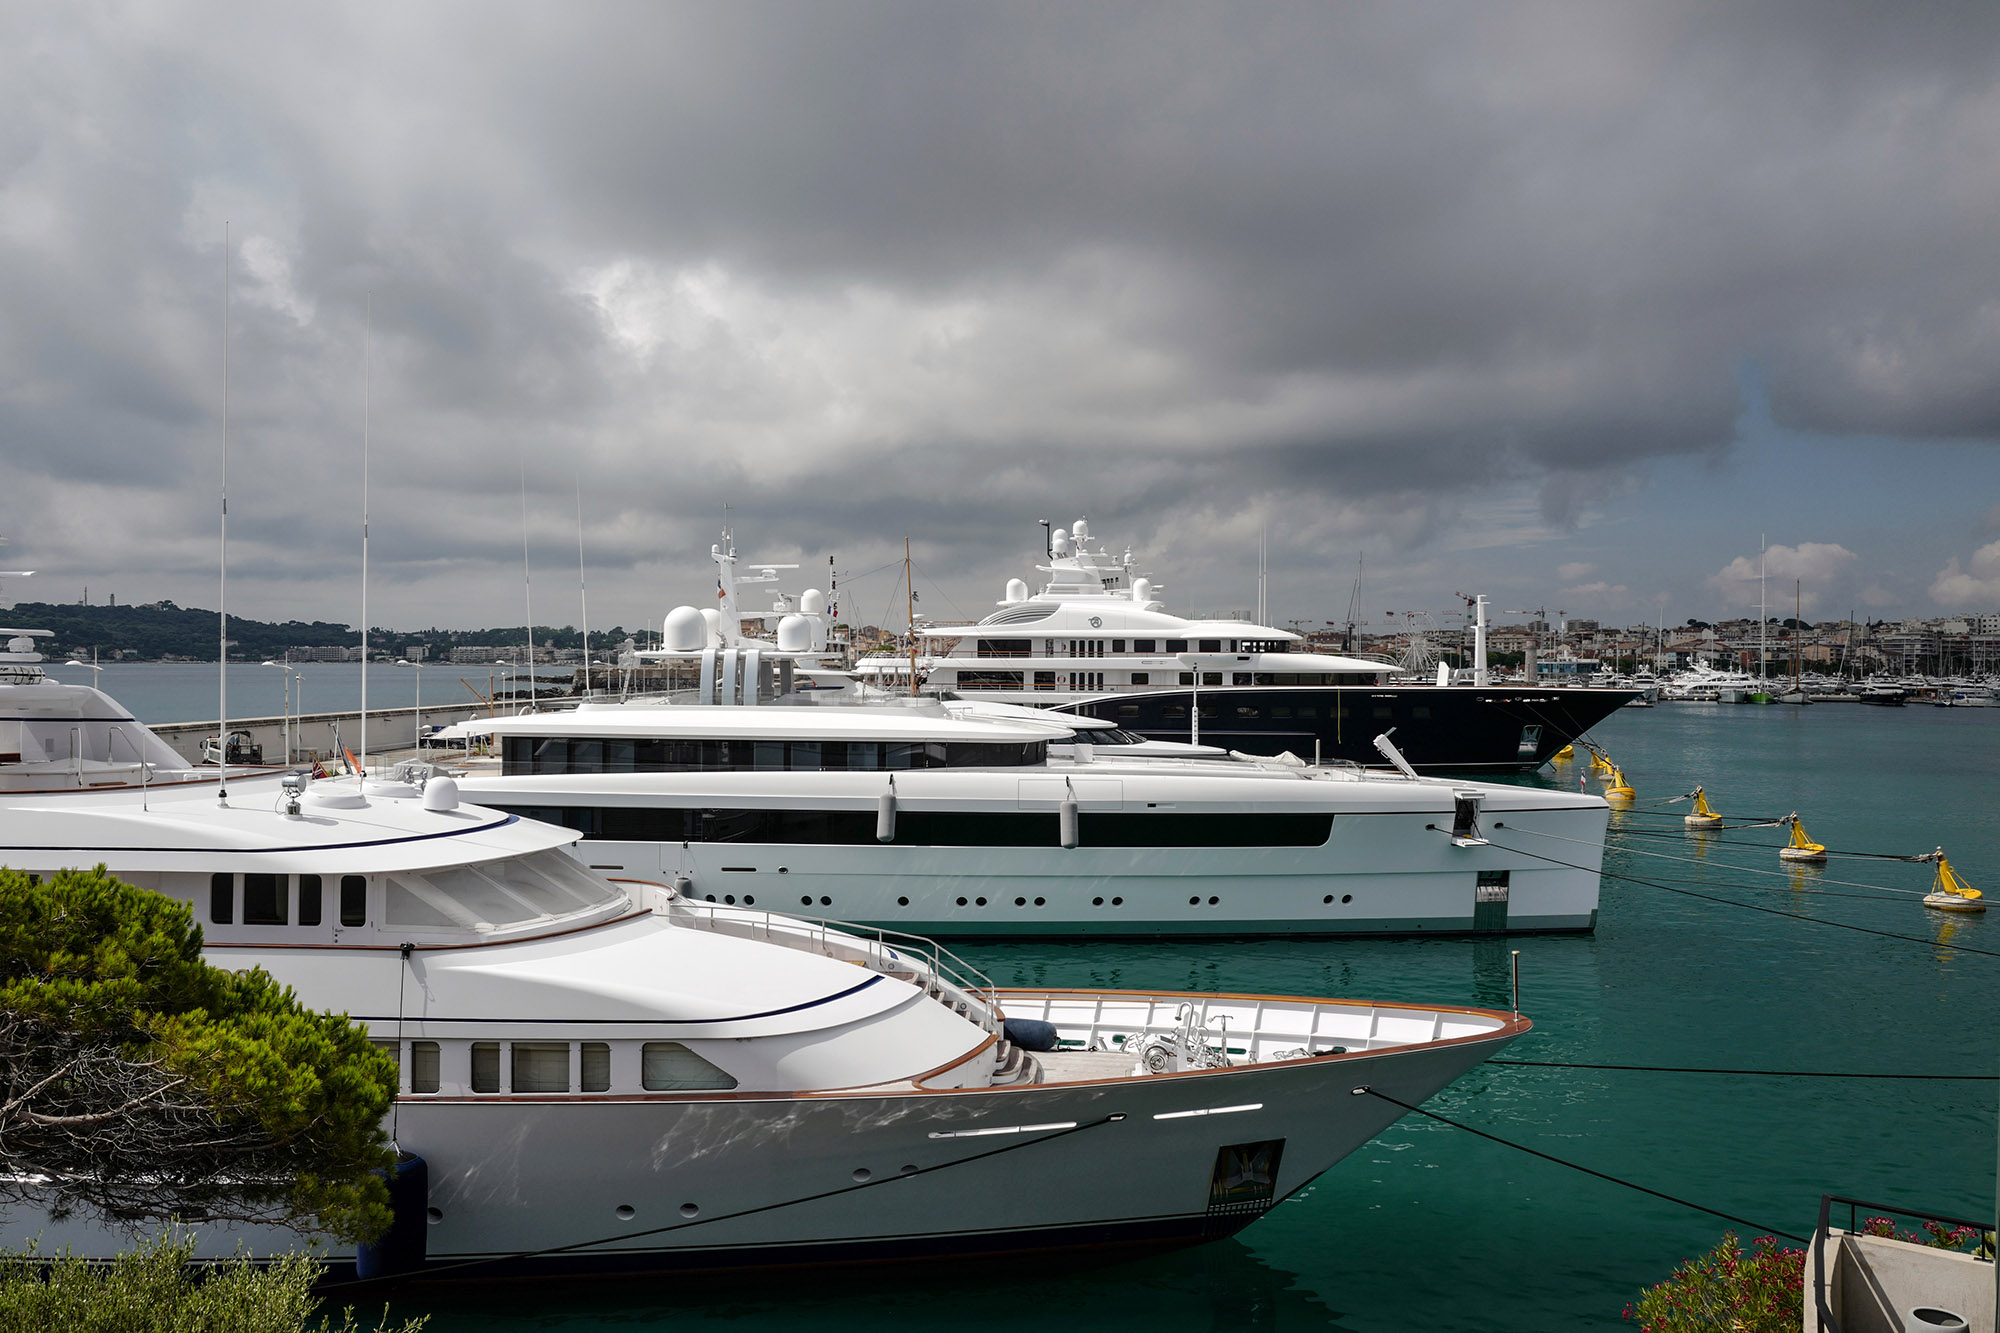 Ssuper yachts moored on the French riviera.&nbsp;